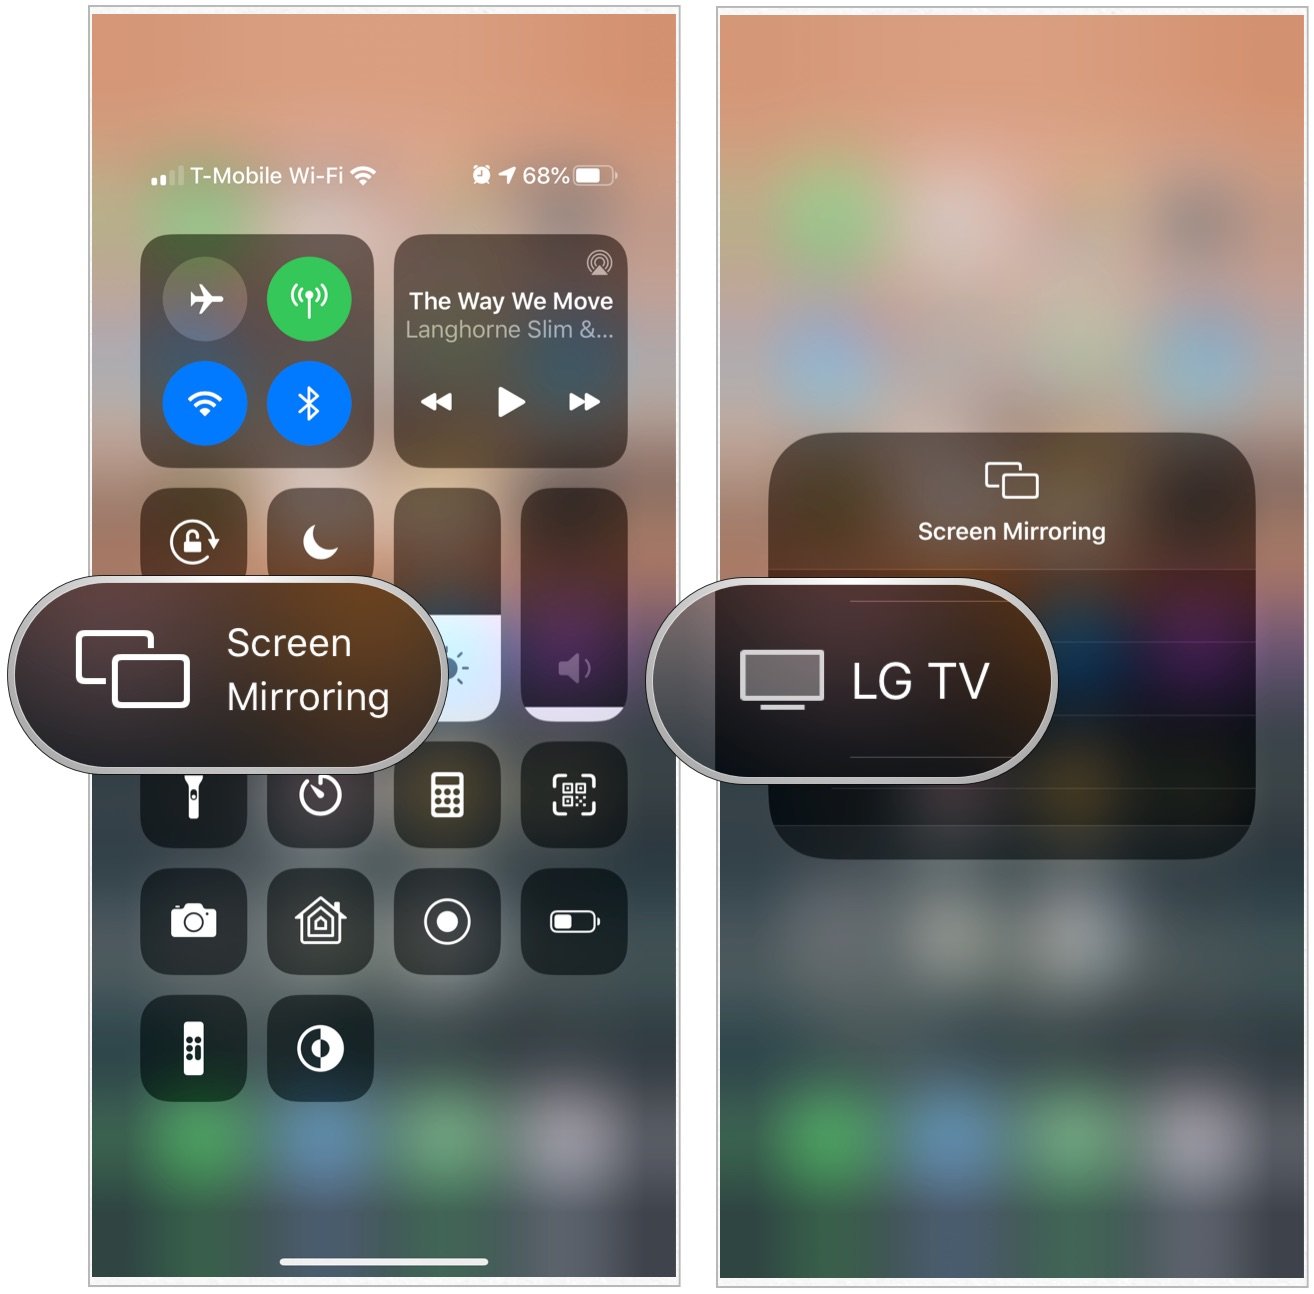 Smart Tvs That Support Airplay 2, How To Screen Mirror An Iphone Lg Smart Tv